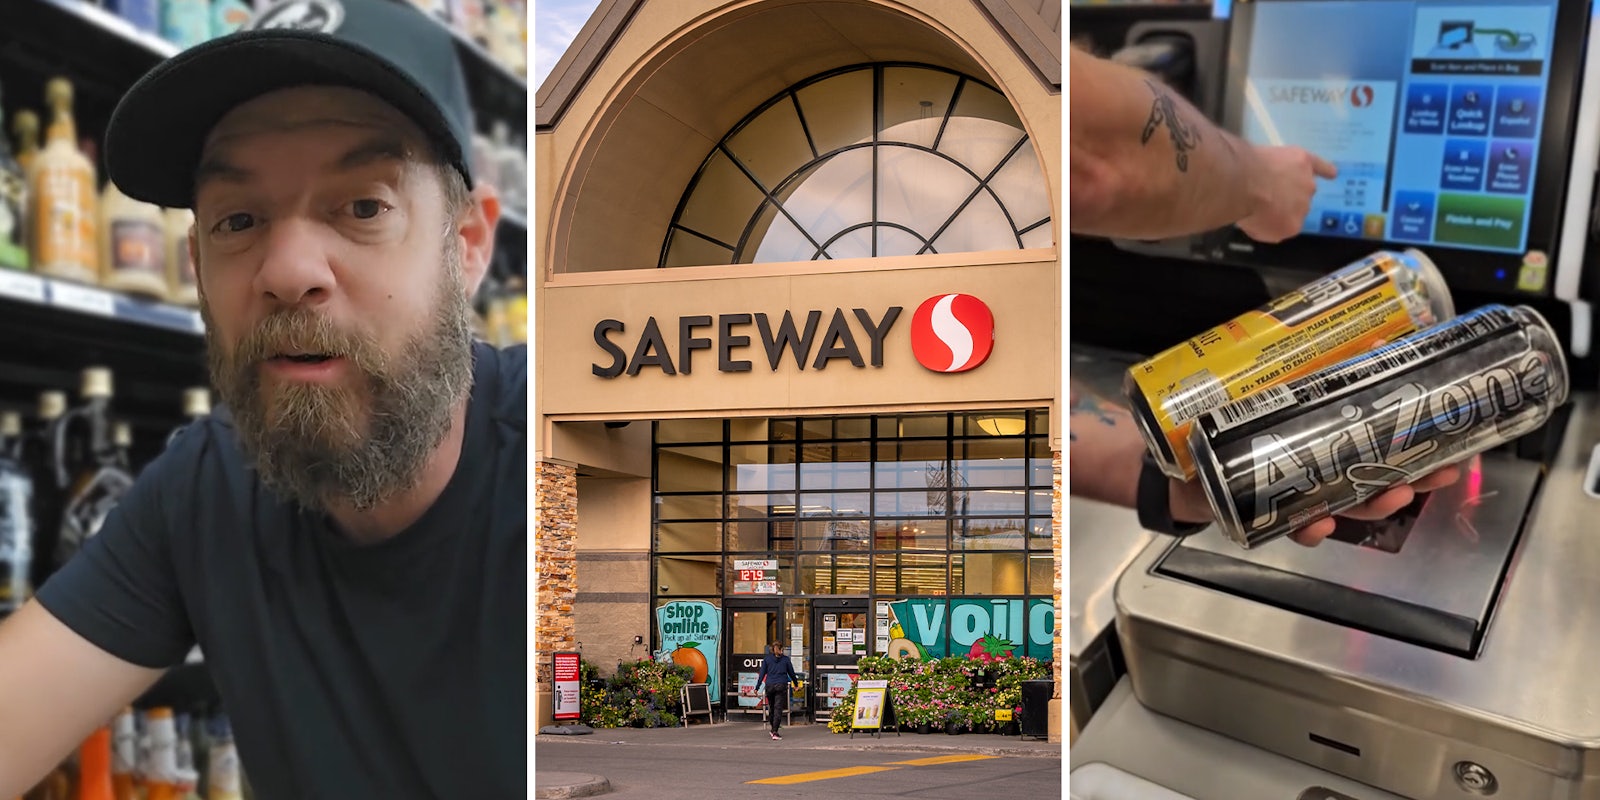 Man shows how easy it is for minors to purchase alcohol using self-checkout at places like Walmart, Safeway, and King Soopers